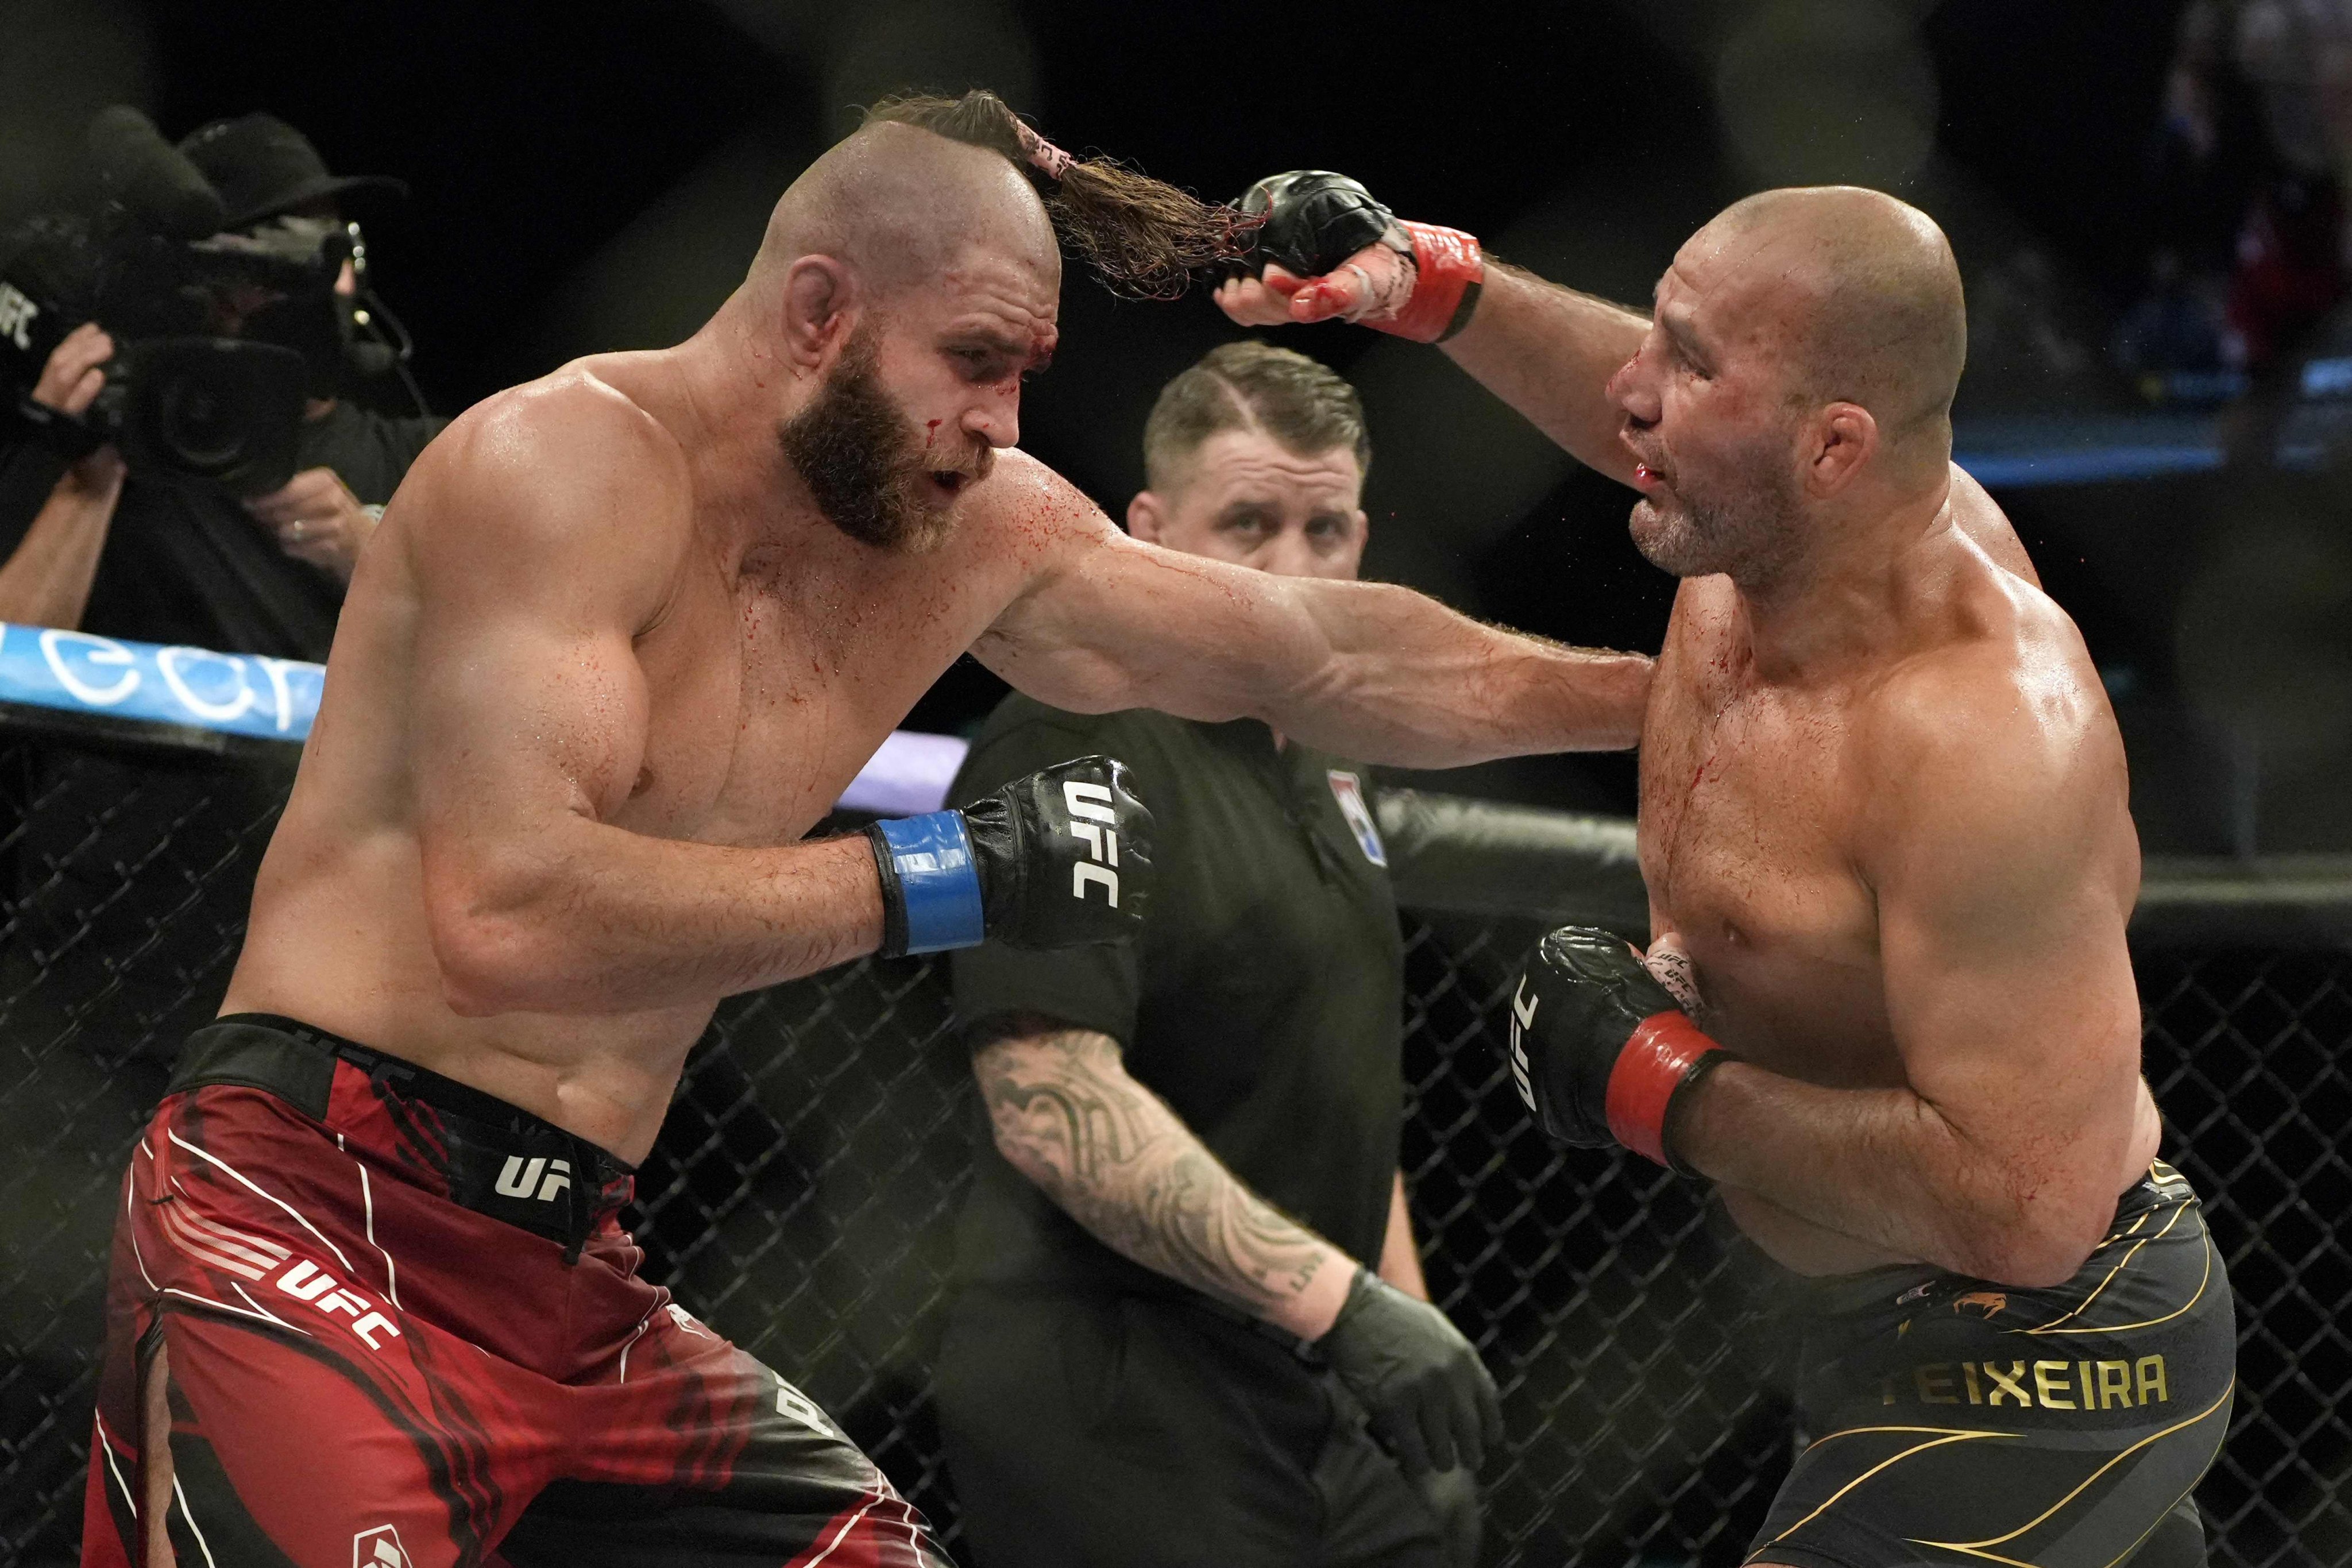 Glover Teixeira trades punches with Jiri Prochazka at UFC 275 in Singapore. Photo: AFP